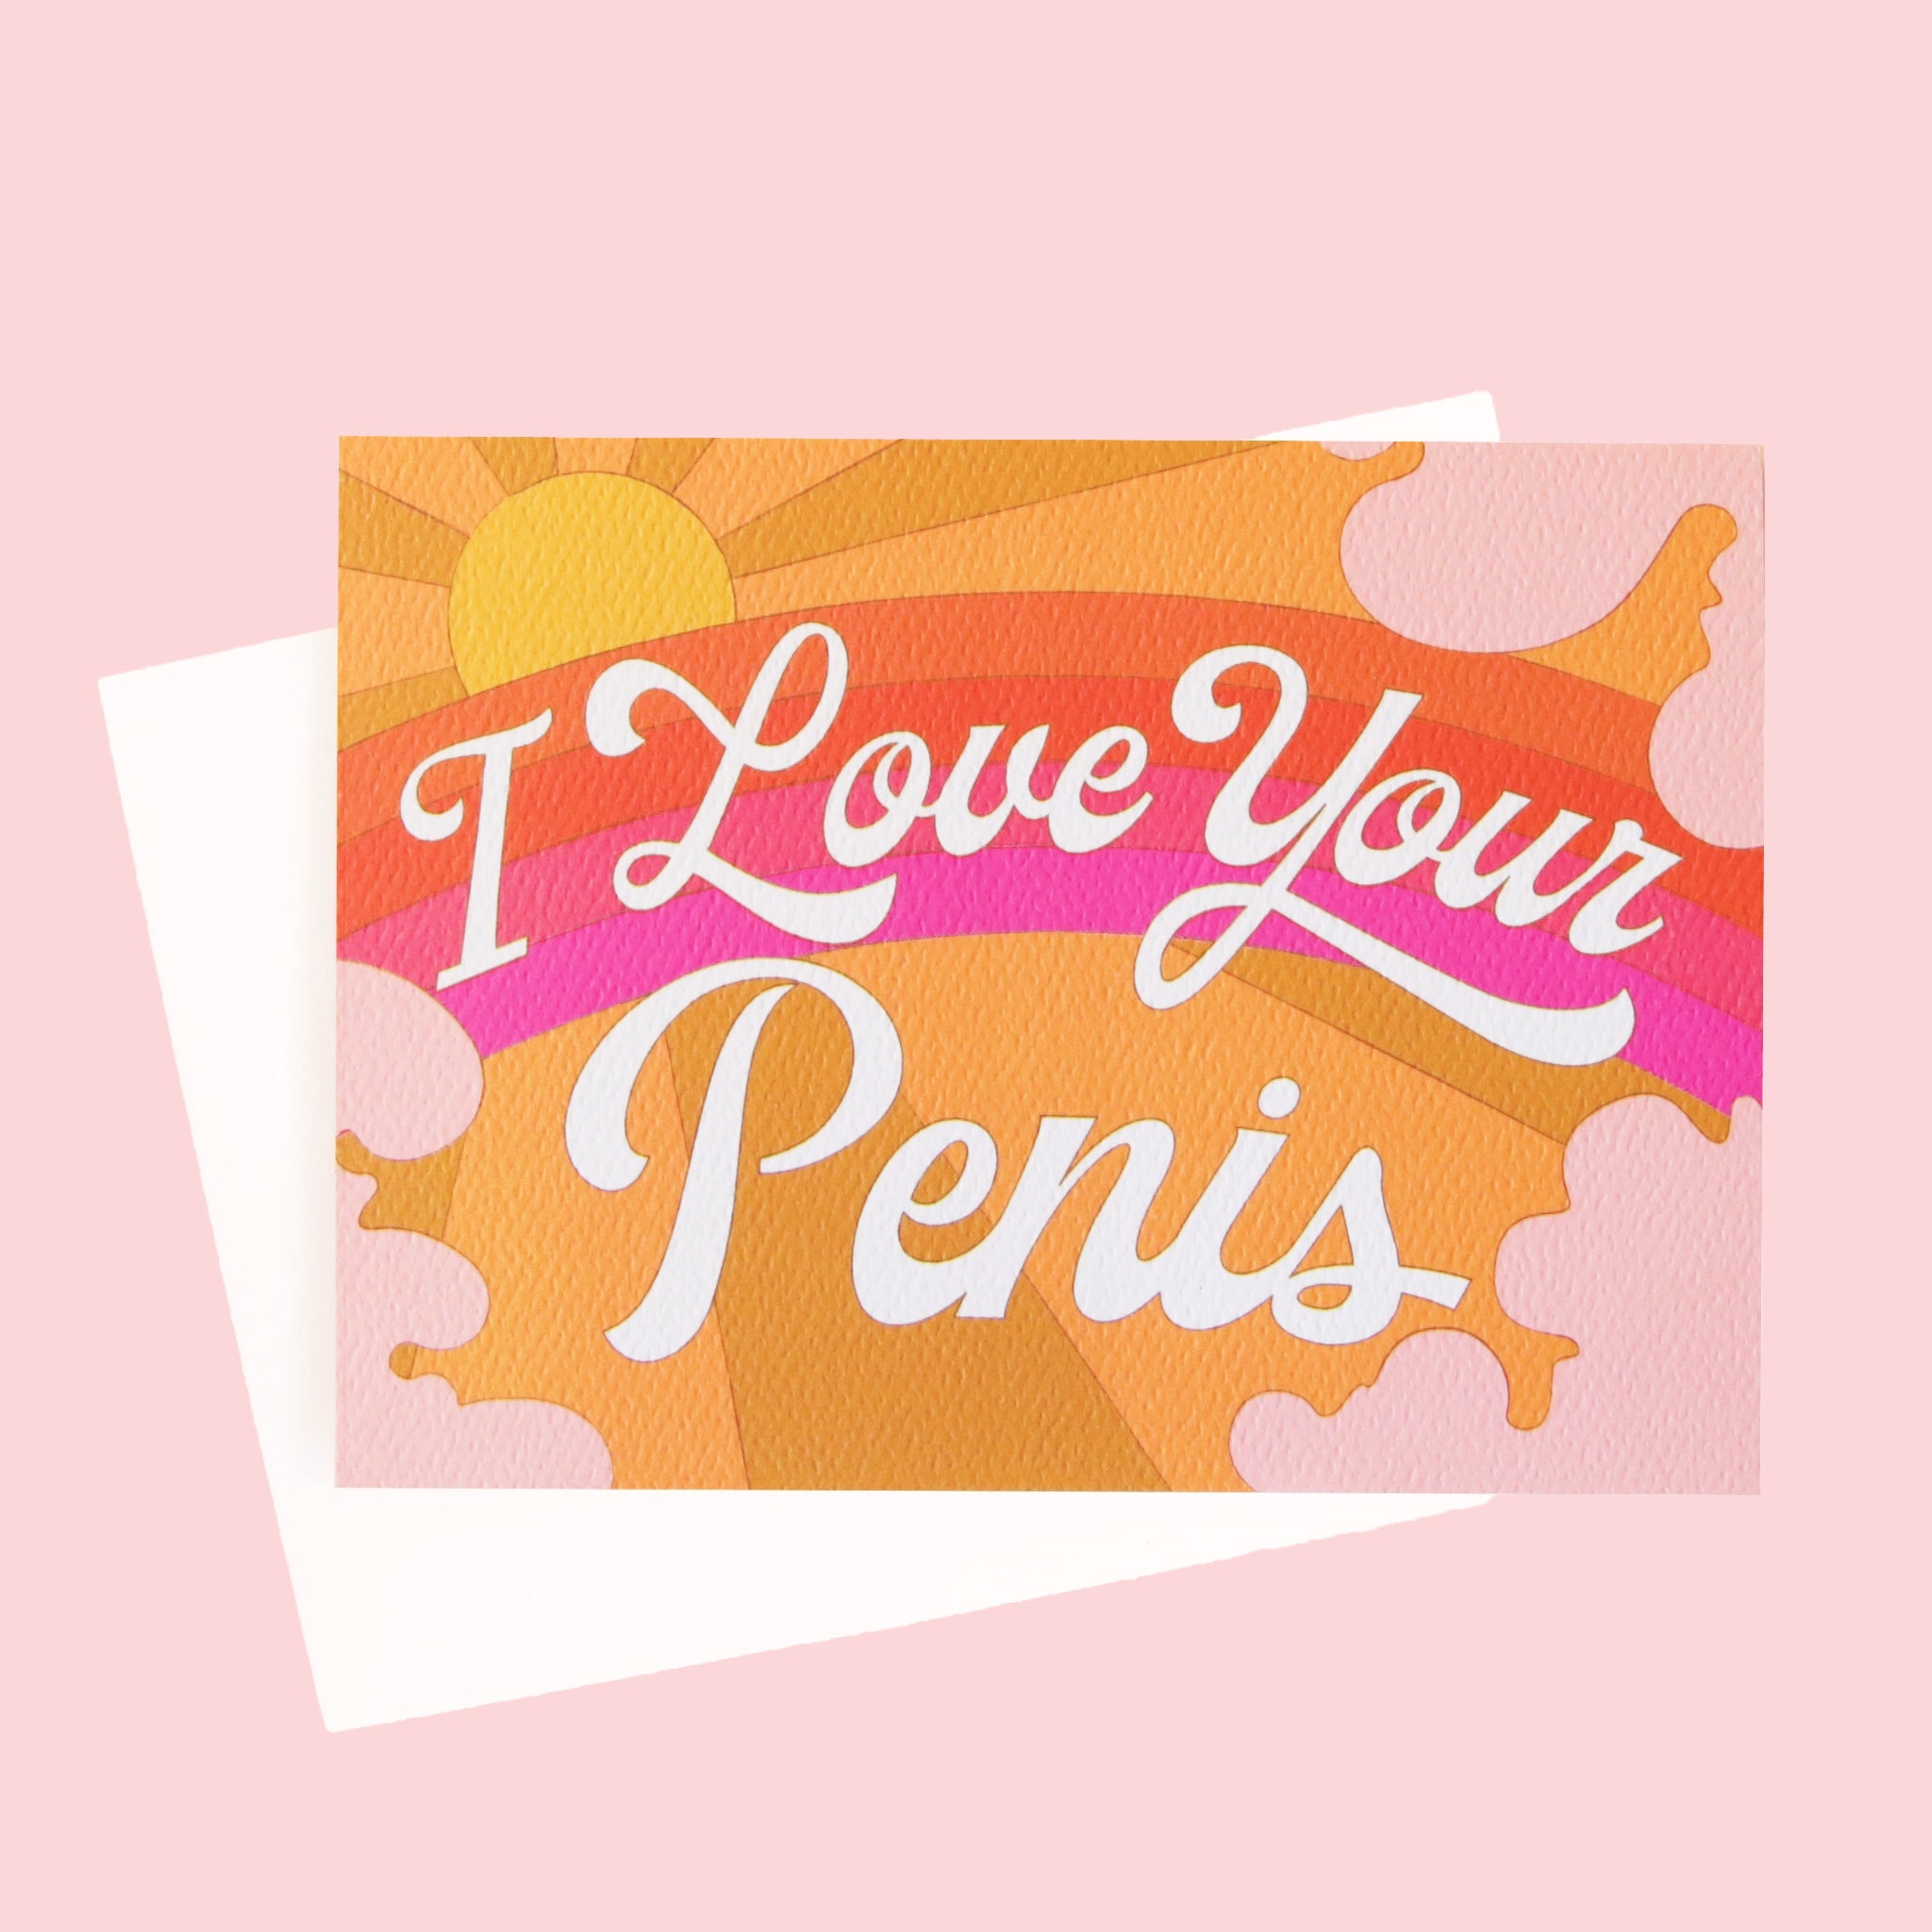 On a white background is a card with a rainbow sky illustration with text across the front that reads, "I Love Your Penis".